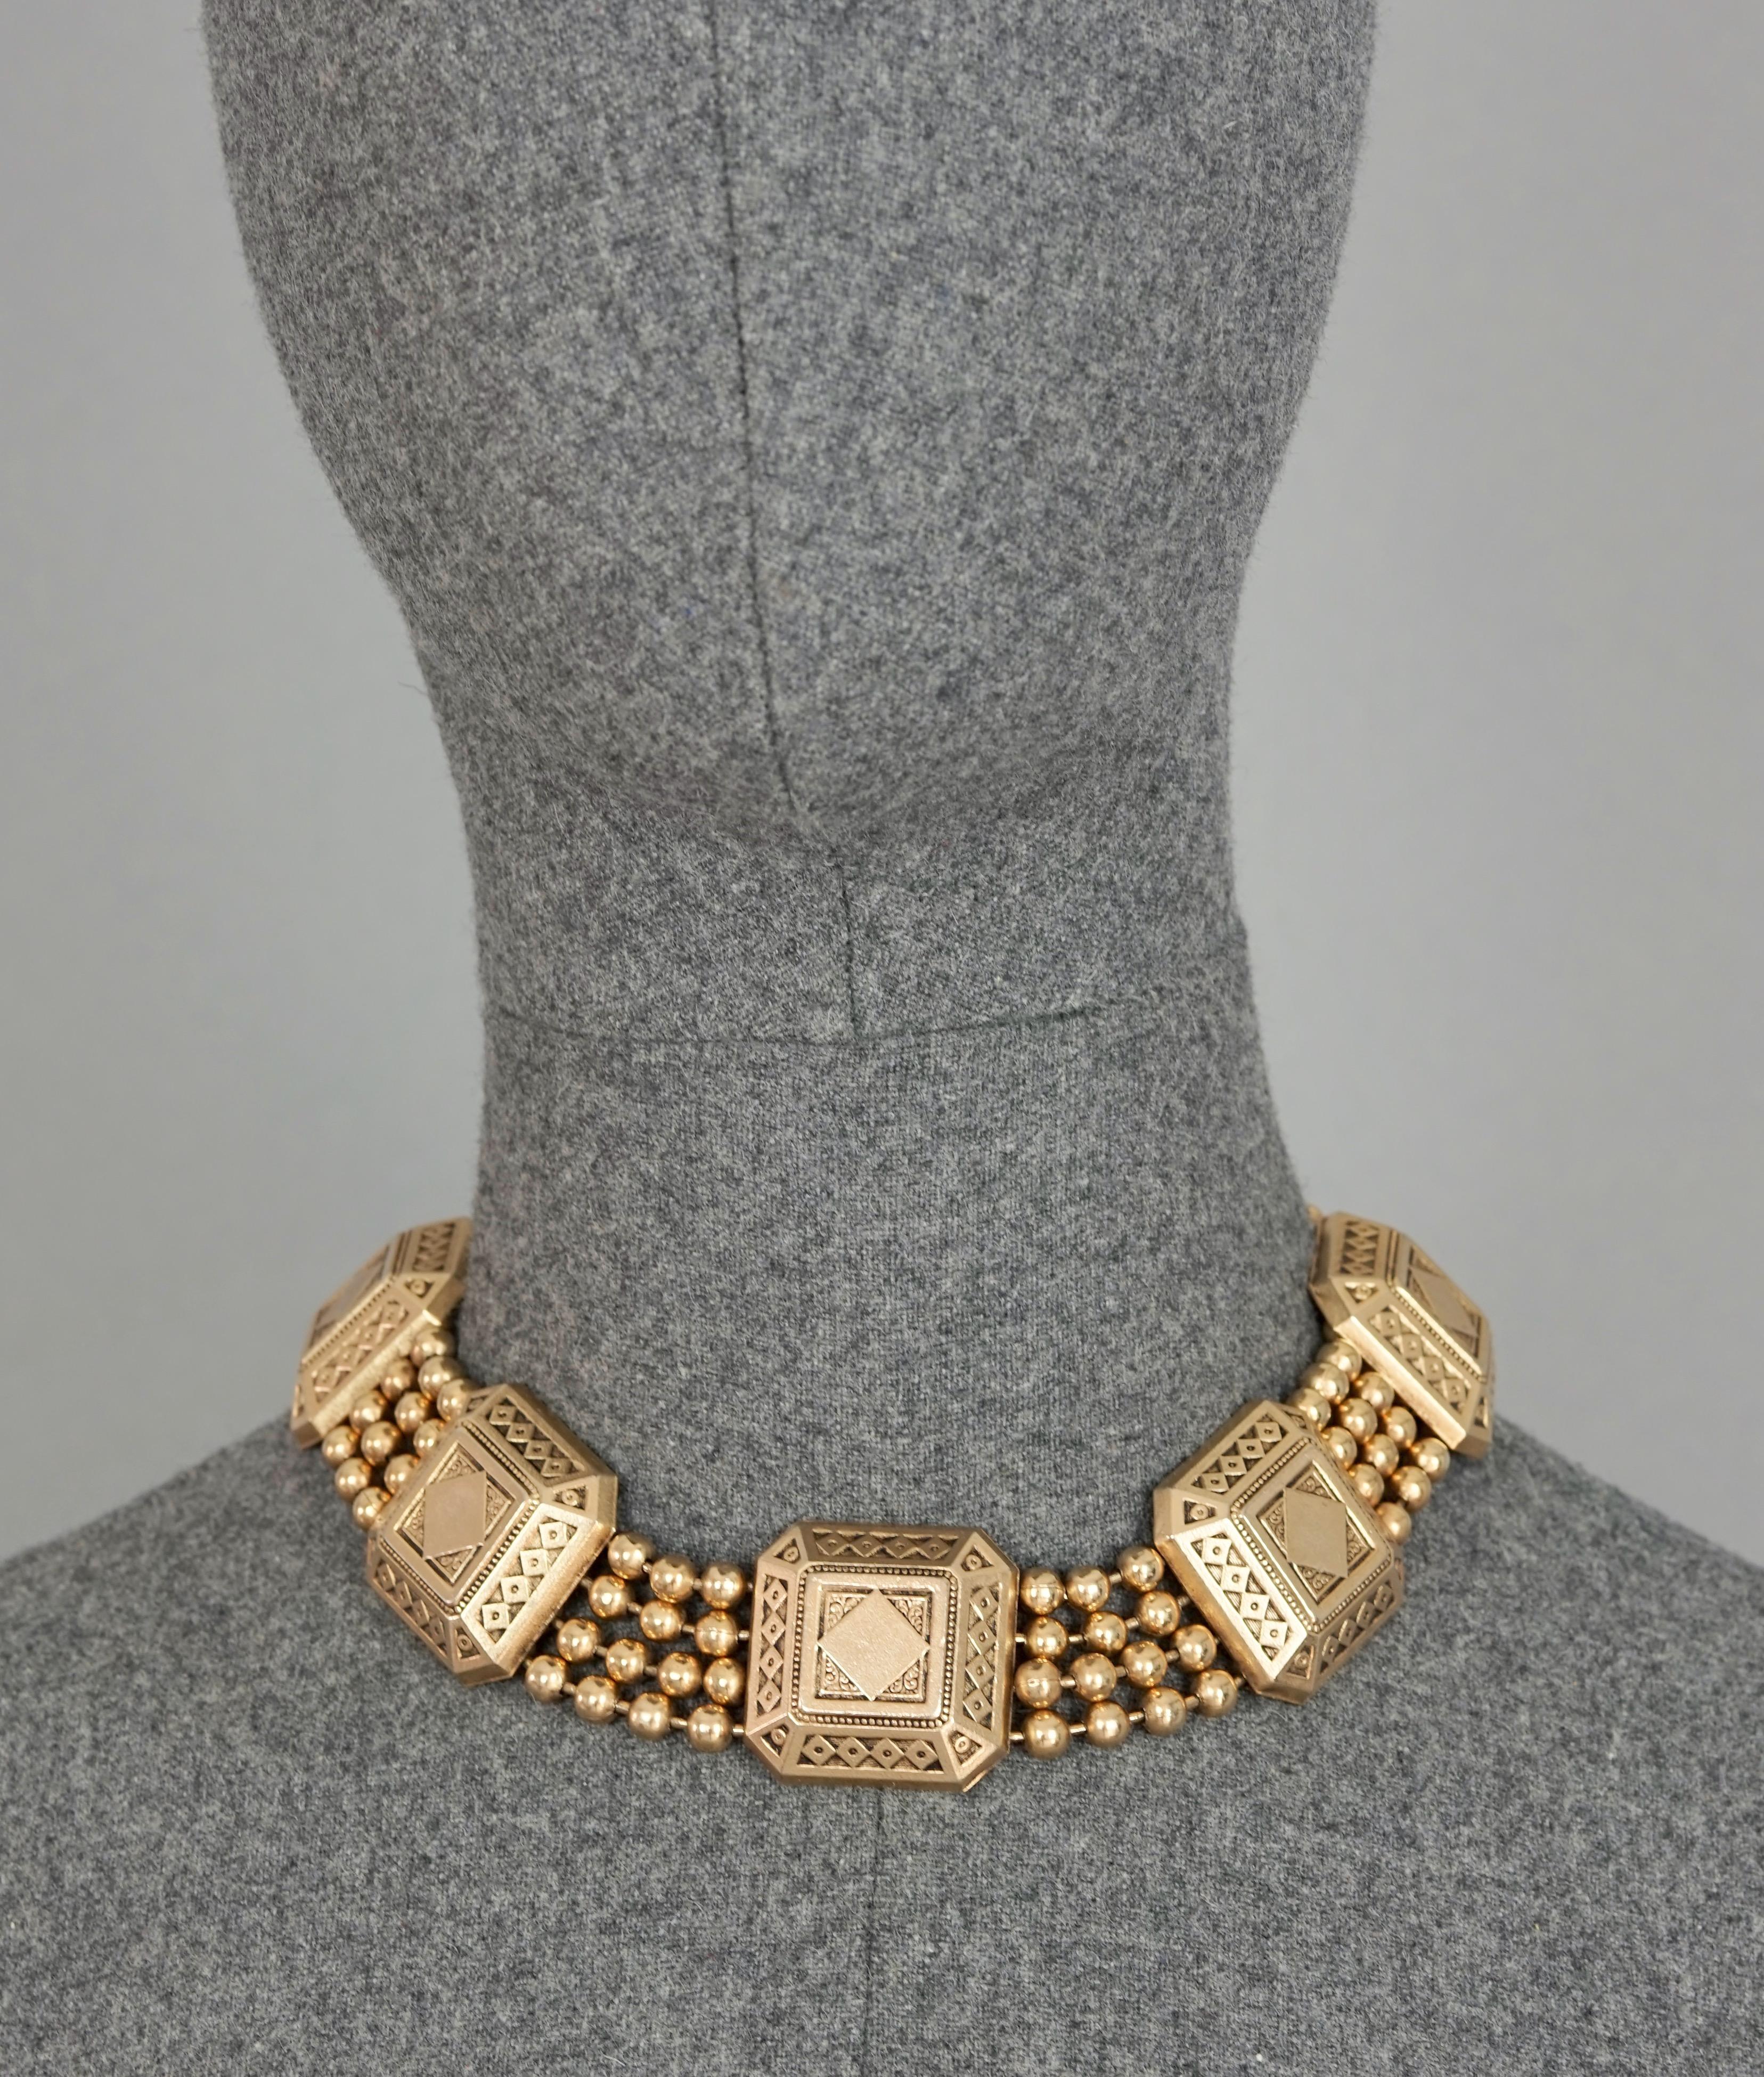 Vintage CLAIRE DEVE Square Charms Multi Layer Ball Chain Necklace

Measurements:
Height: 1.26 inches (3.2 cm)
Wearable Length: 15.55 inches (39.5 cm)

Features:
- 100% Authentic CLAIRE DEVE.
- Chunky square charms with 4 layers of ball chains